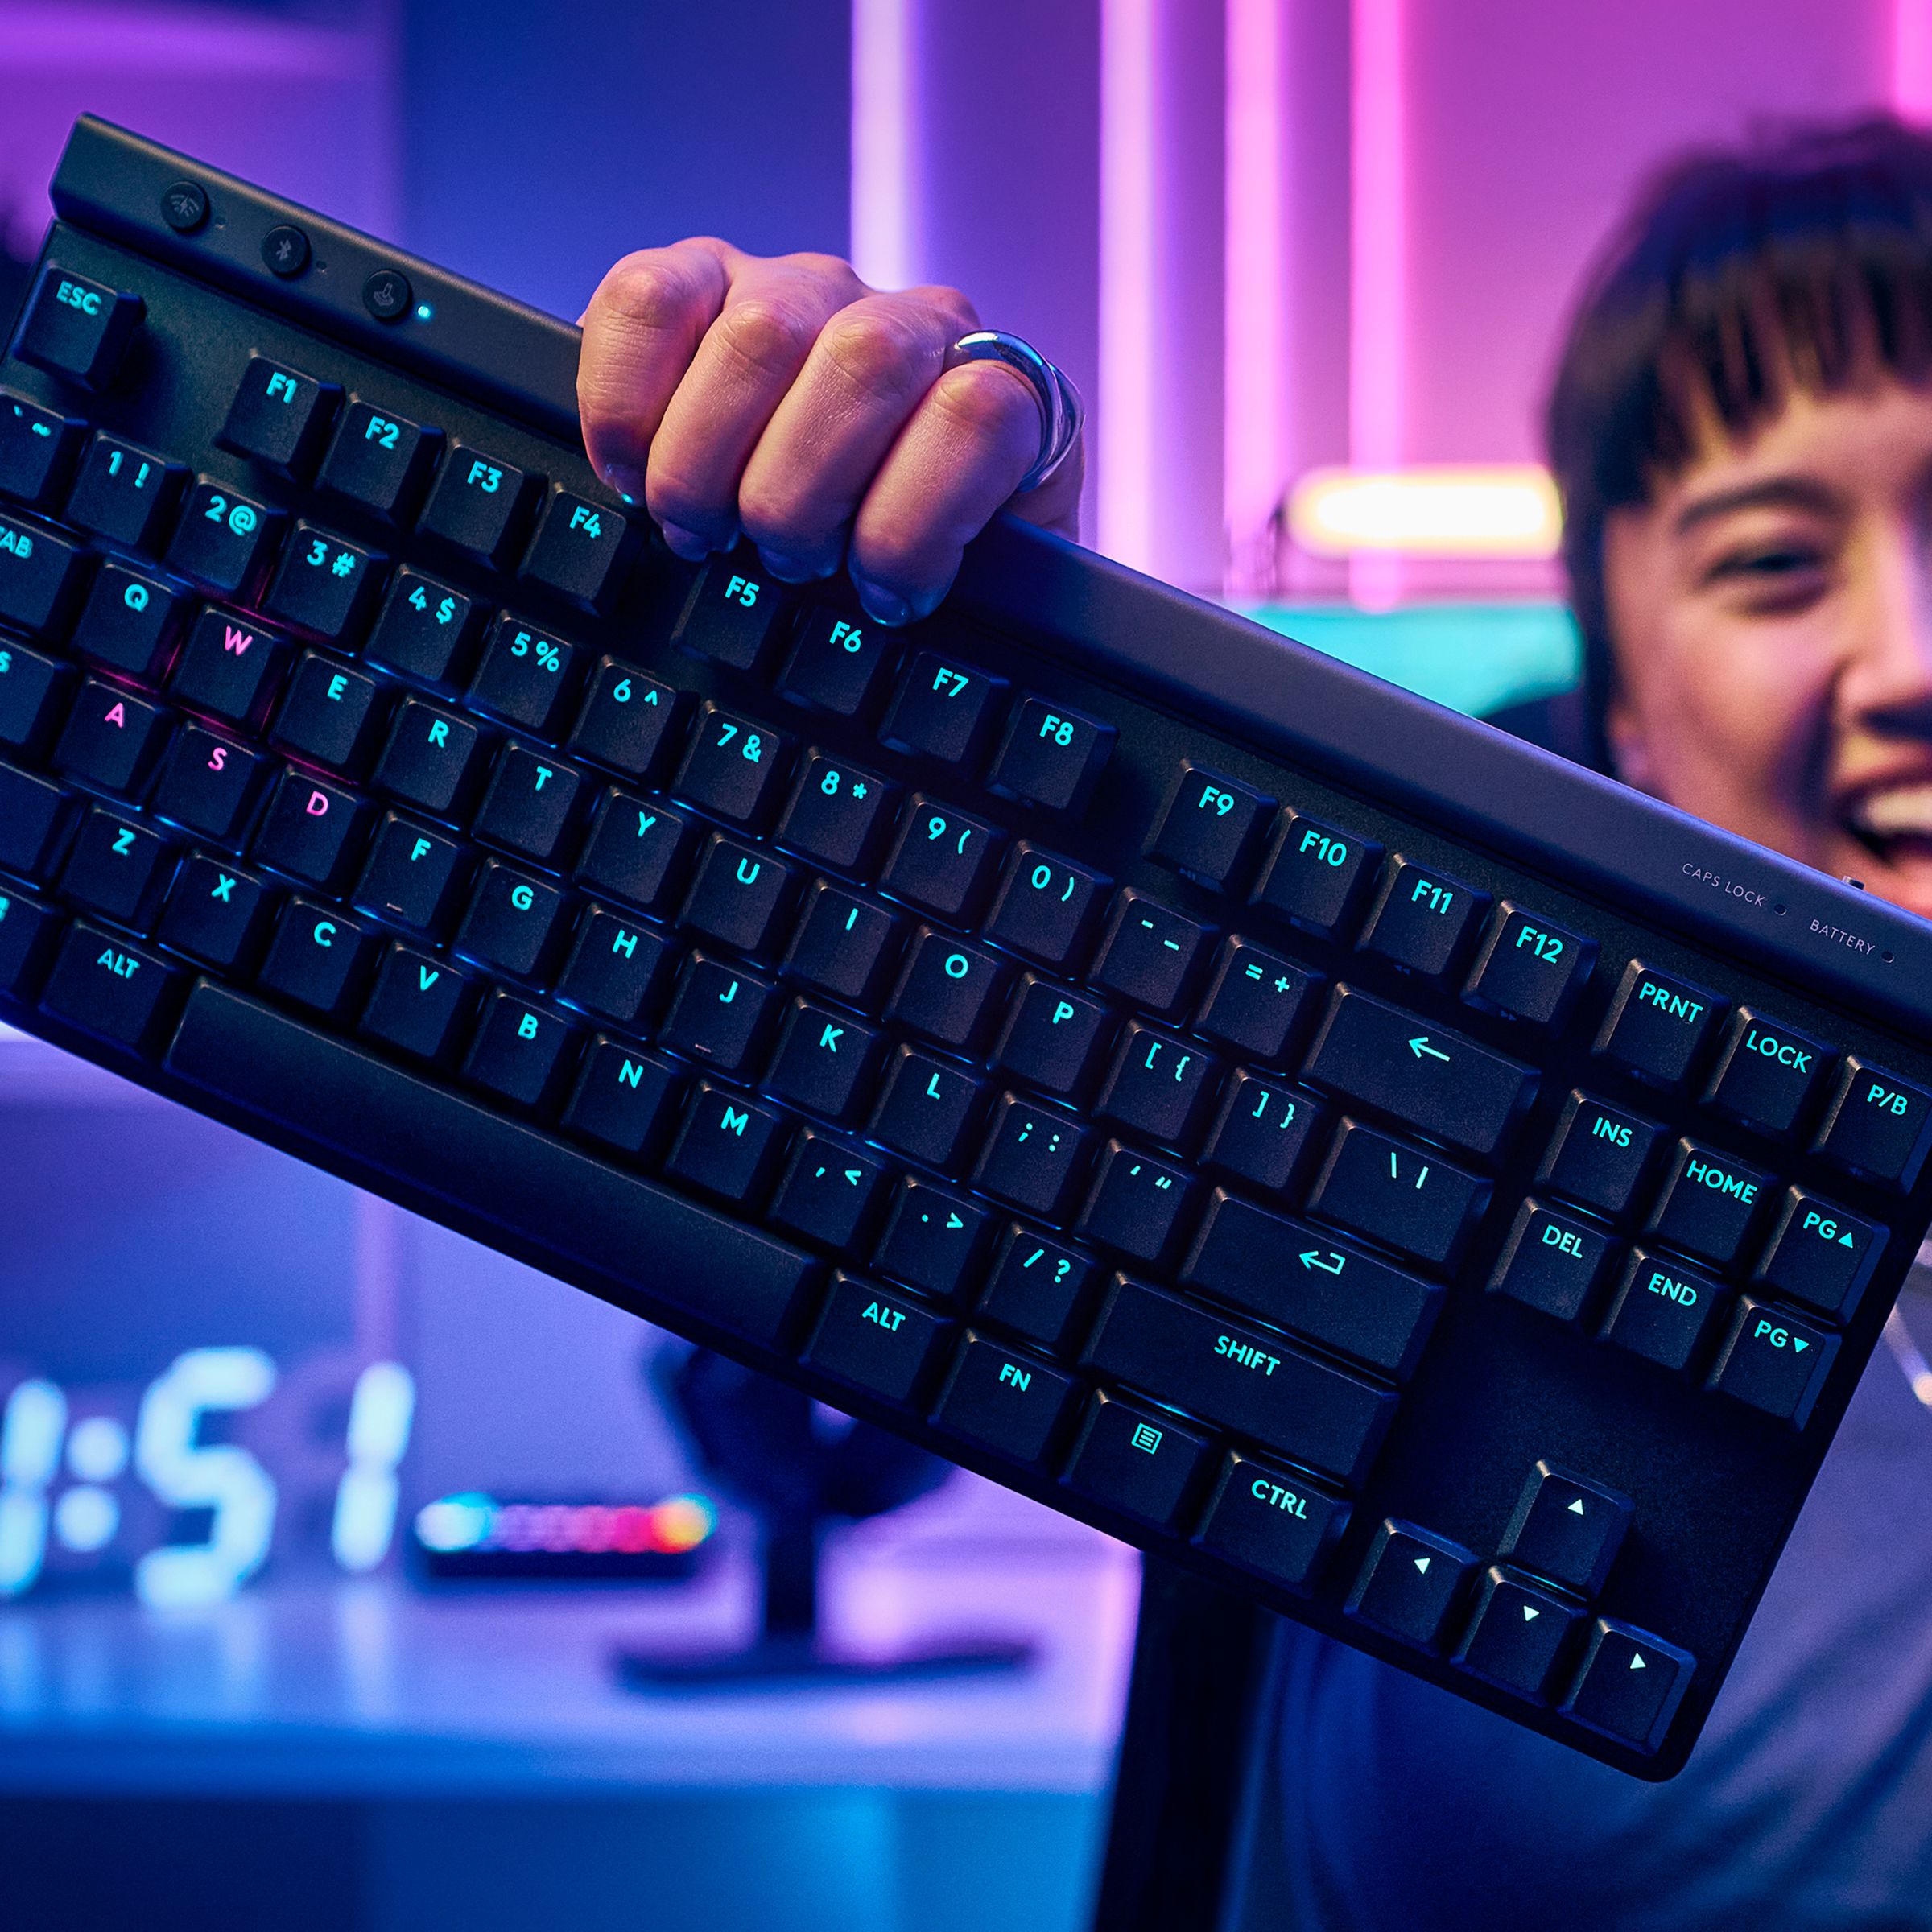 A user holds the Logitech G515 keyboard in one hand in front a computer setup featuring neon lighting.